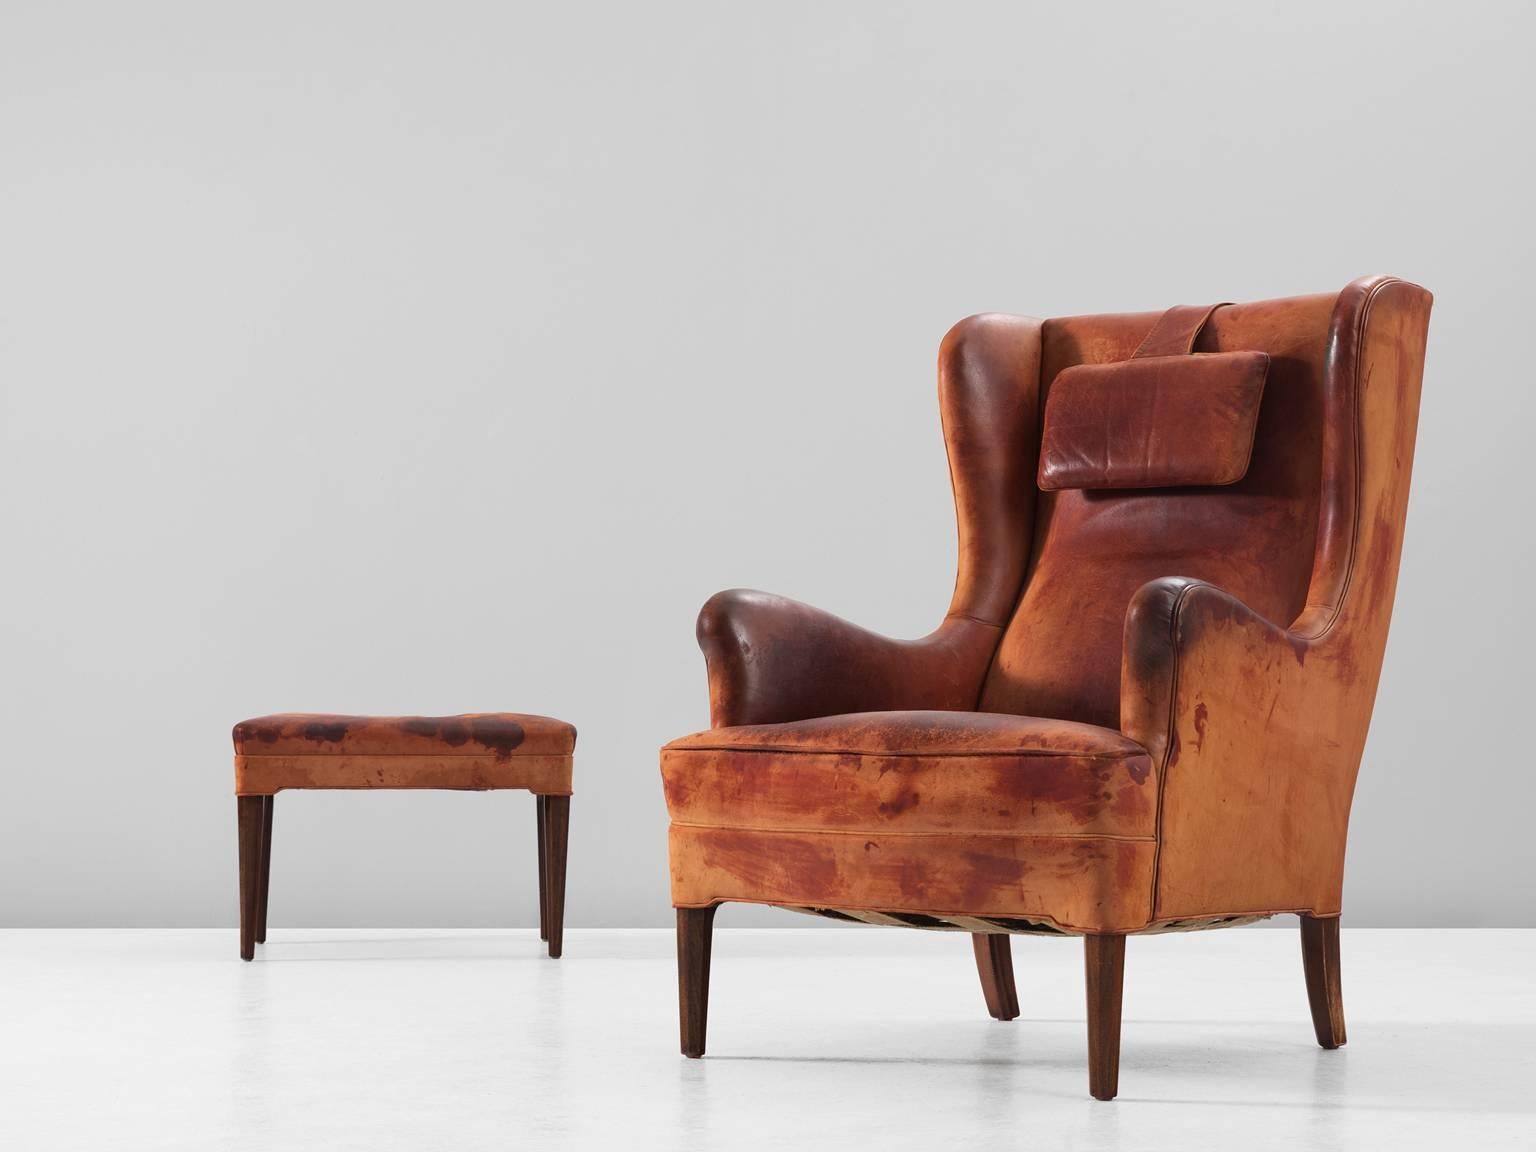 Wingback chair and ottoman in leather and wood by Frits Henningsen, Denmark, 1940s.

Classical wingback chair with accompanying footstool in patinated cognac leather. This chair and ottoman hold their original cognac leather upholstery. Therefore